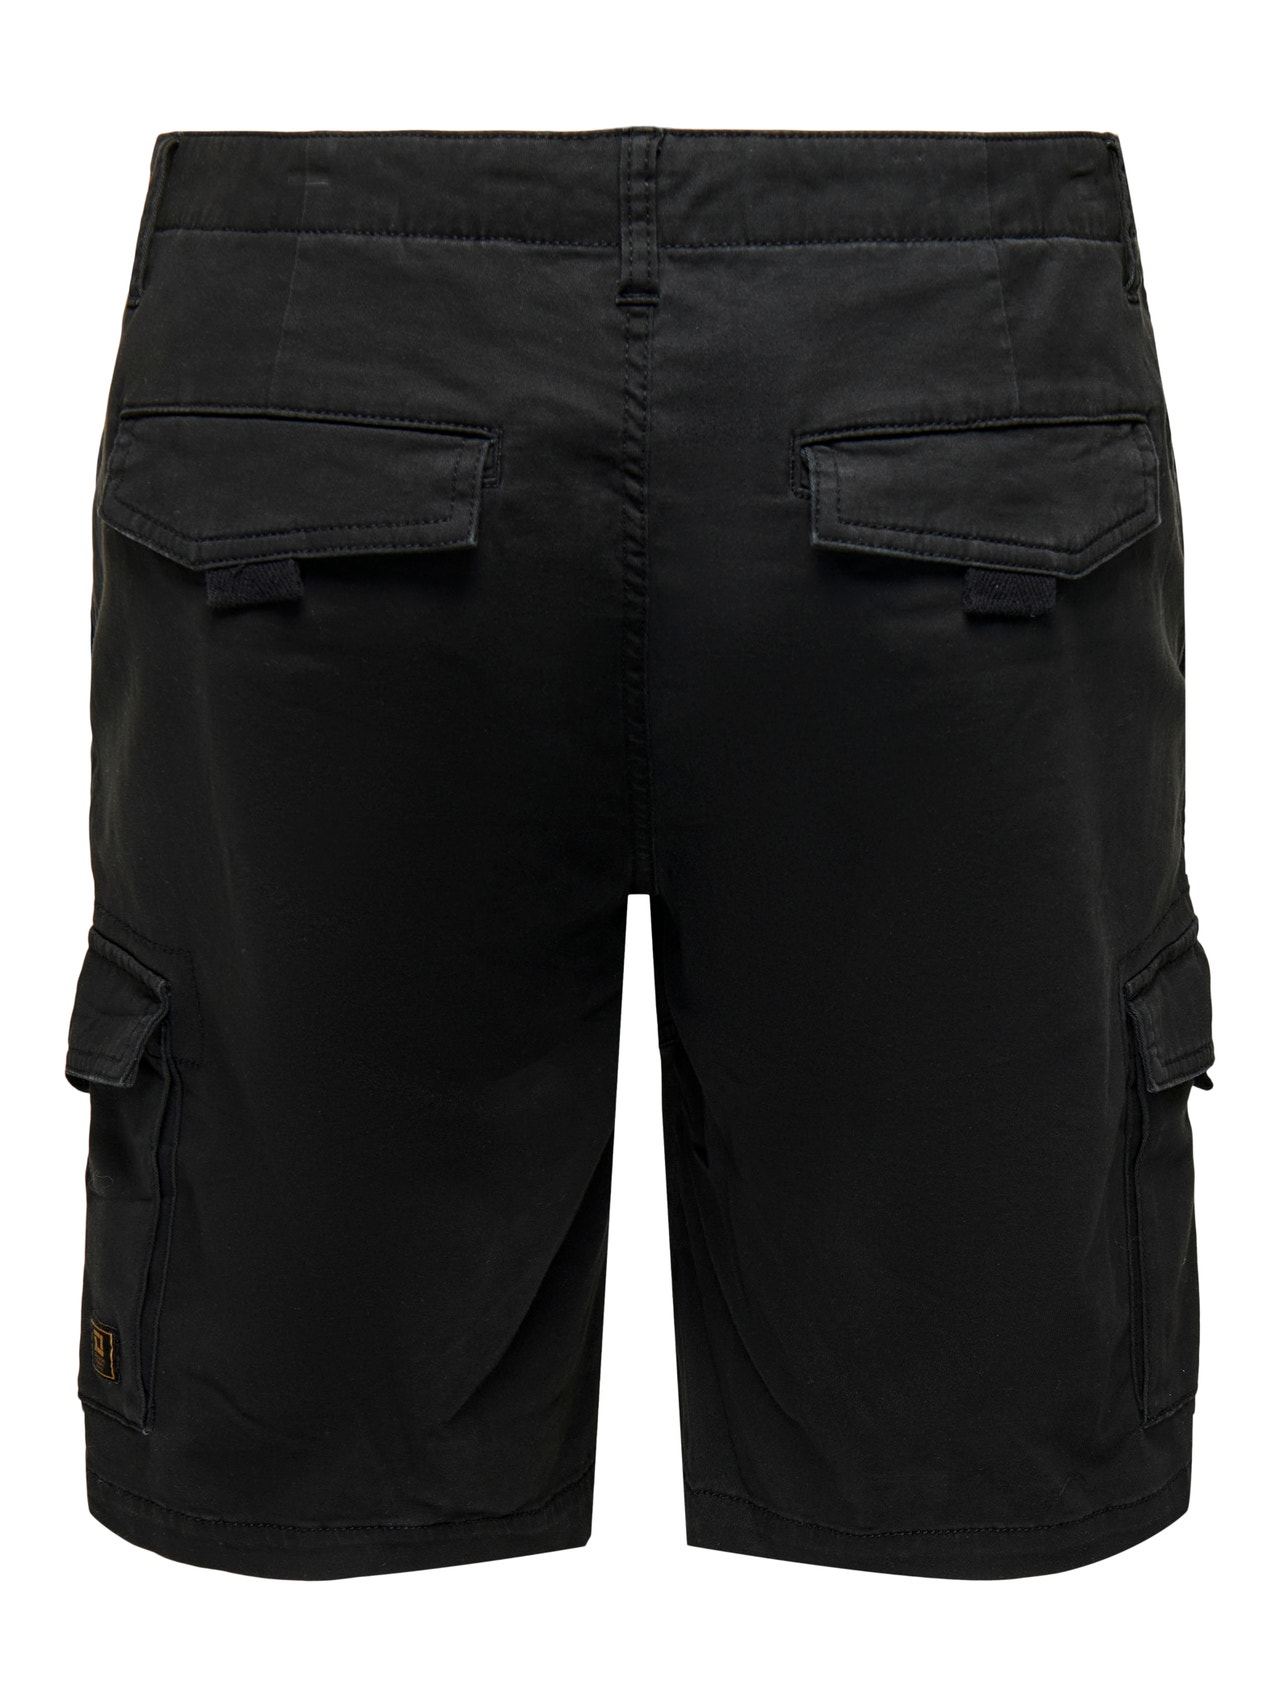 ONLY & SONS Normal passform Cargoshorts -Black - 22025602